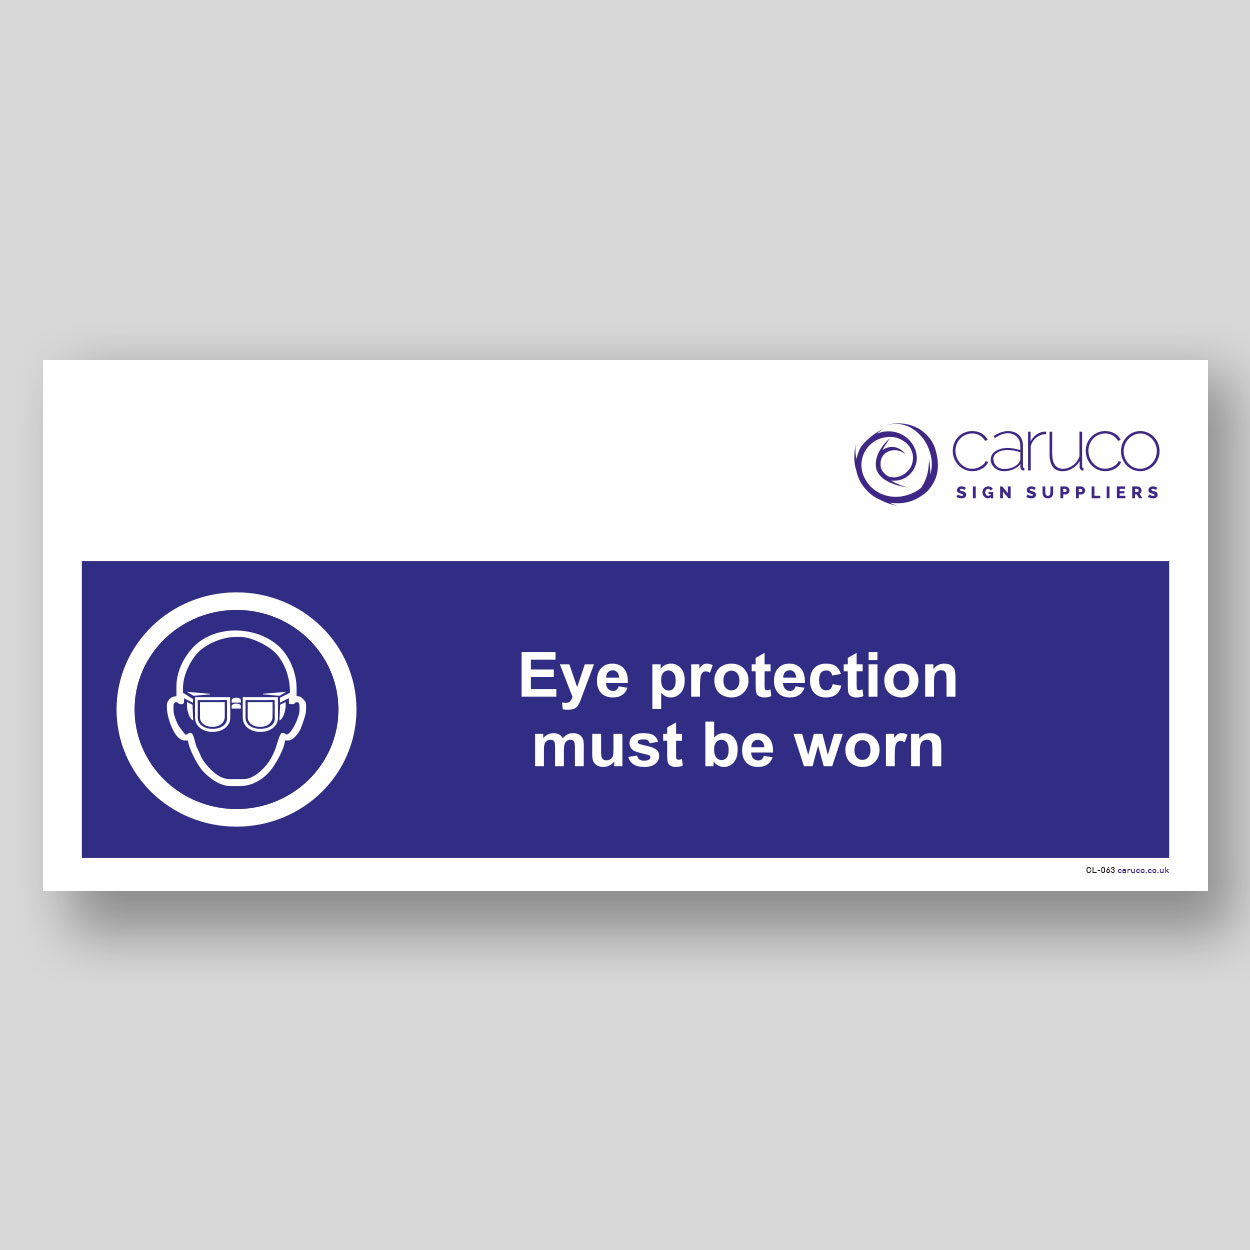 CL-063 Eye protection must be worn